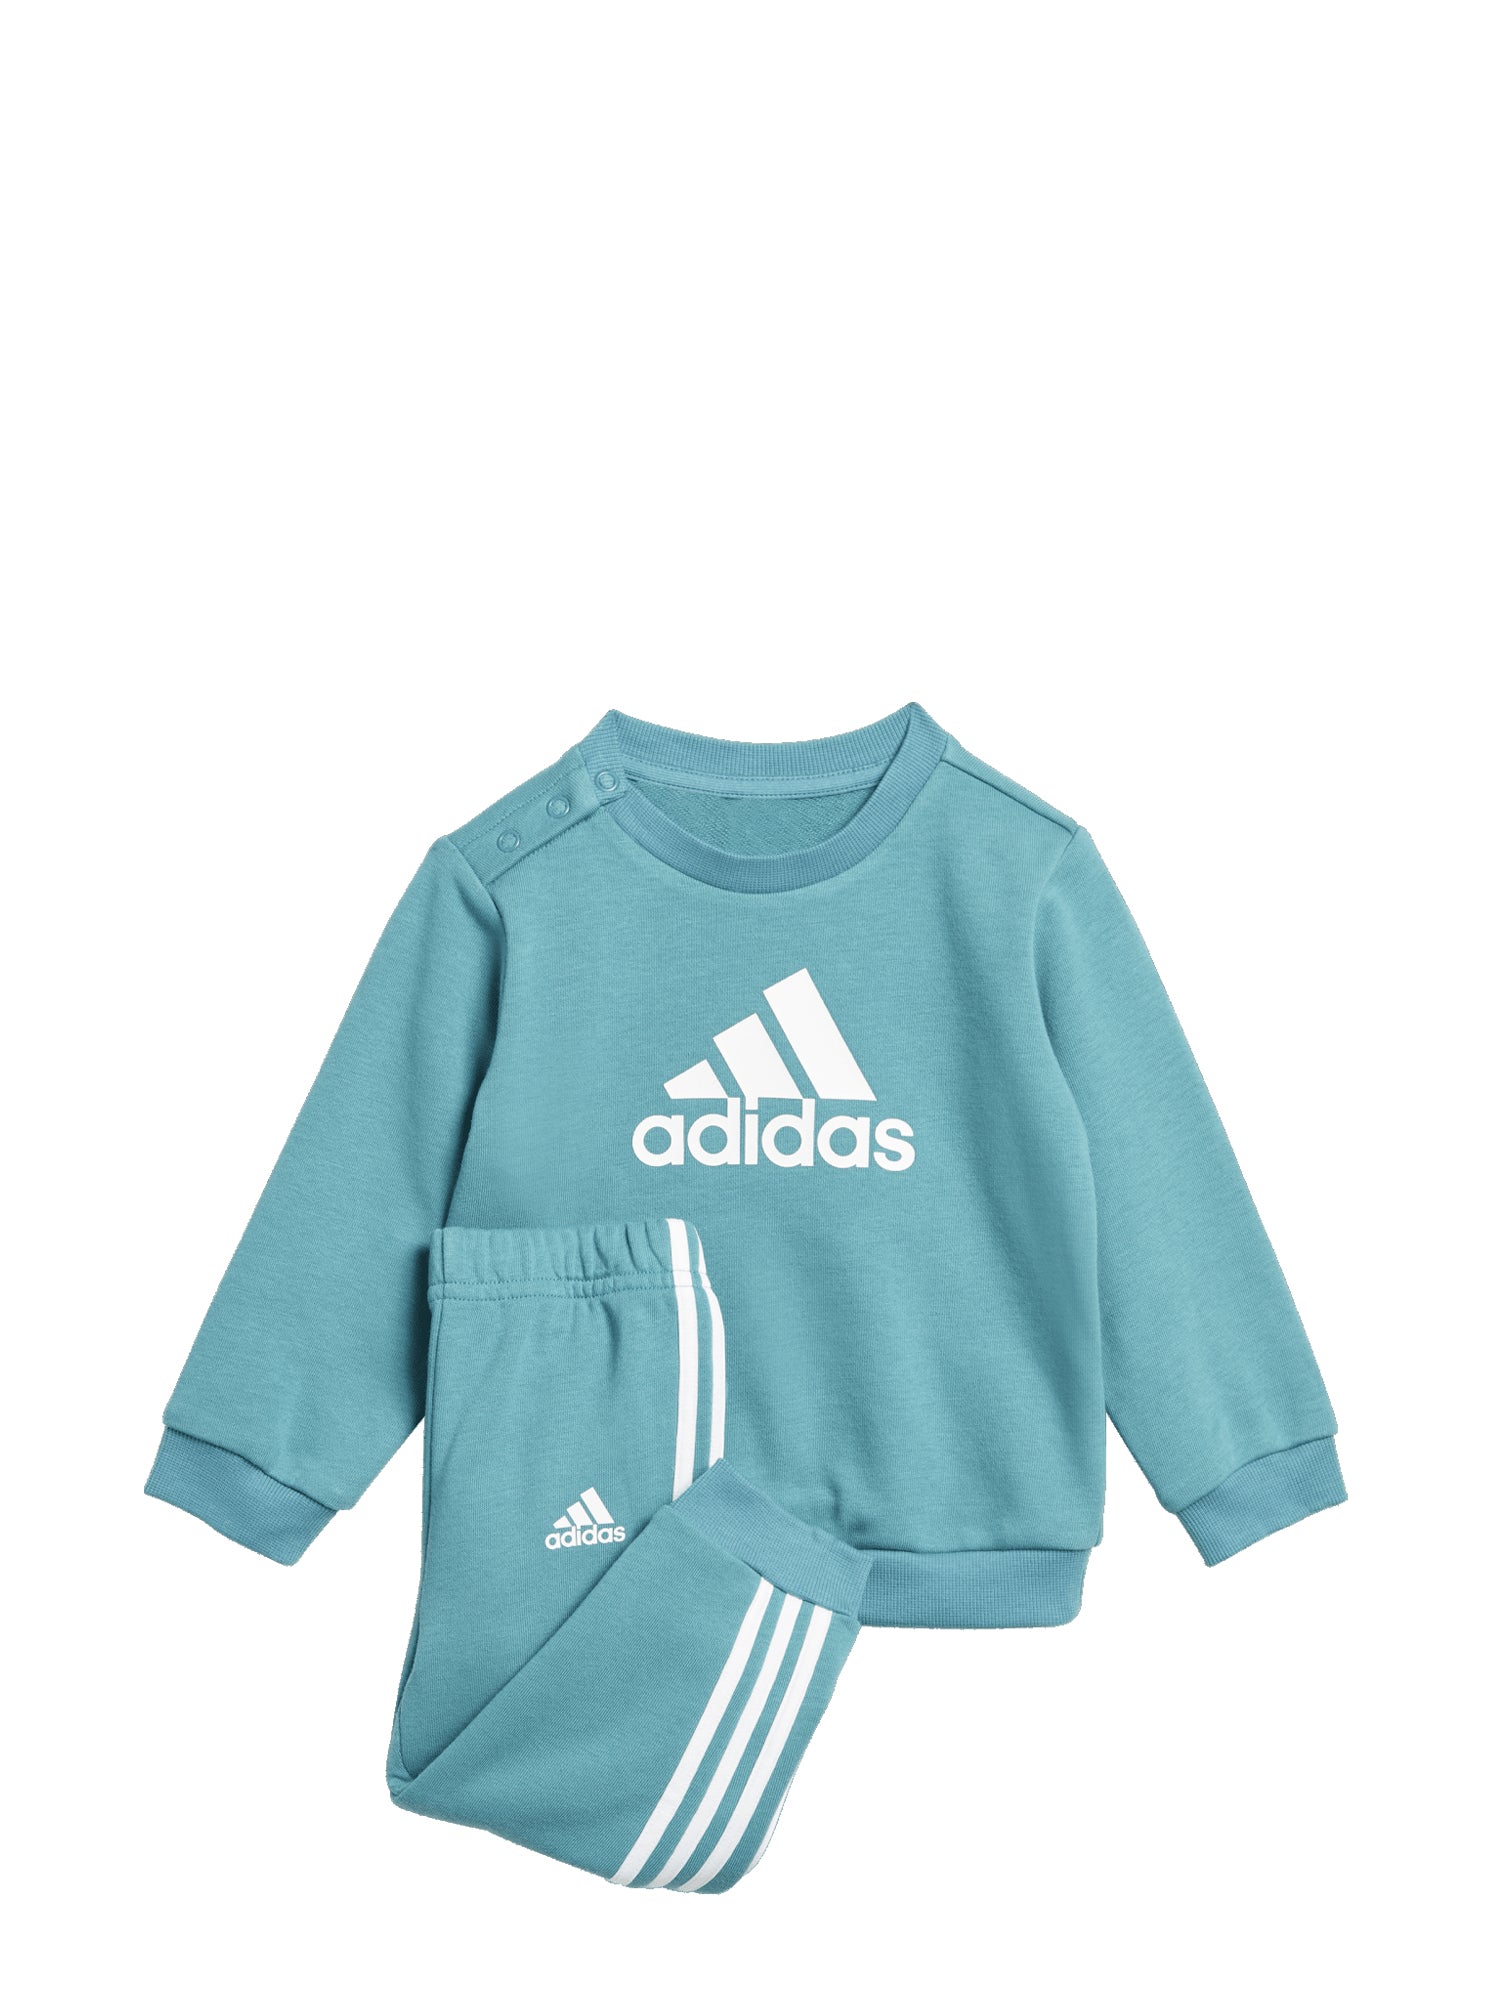 ADIDAS COMPLETINO BADGE OF SPORT FRENCH TERRY TURCHESE